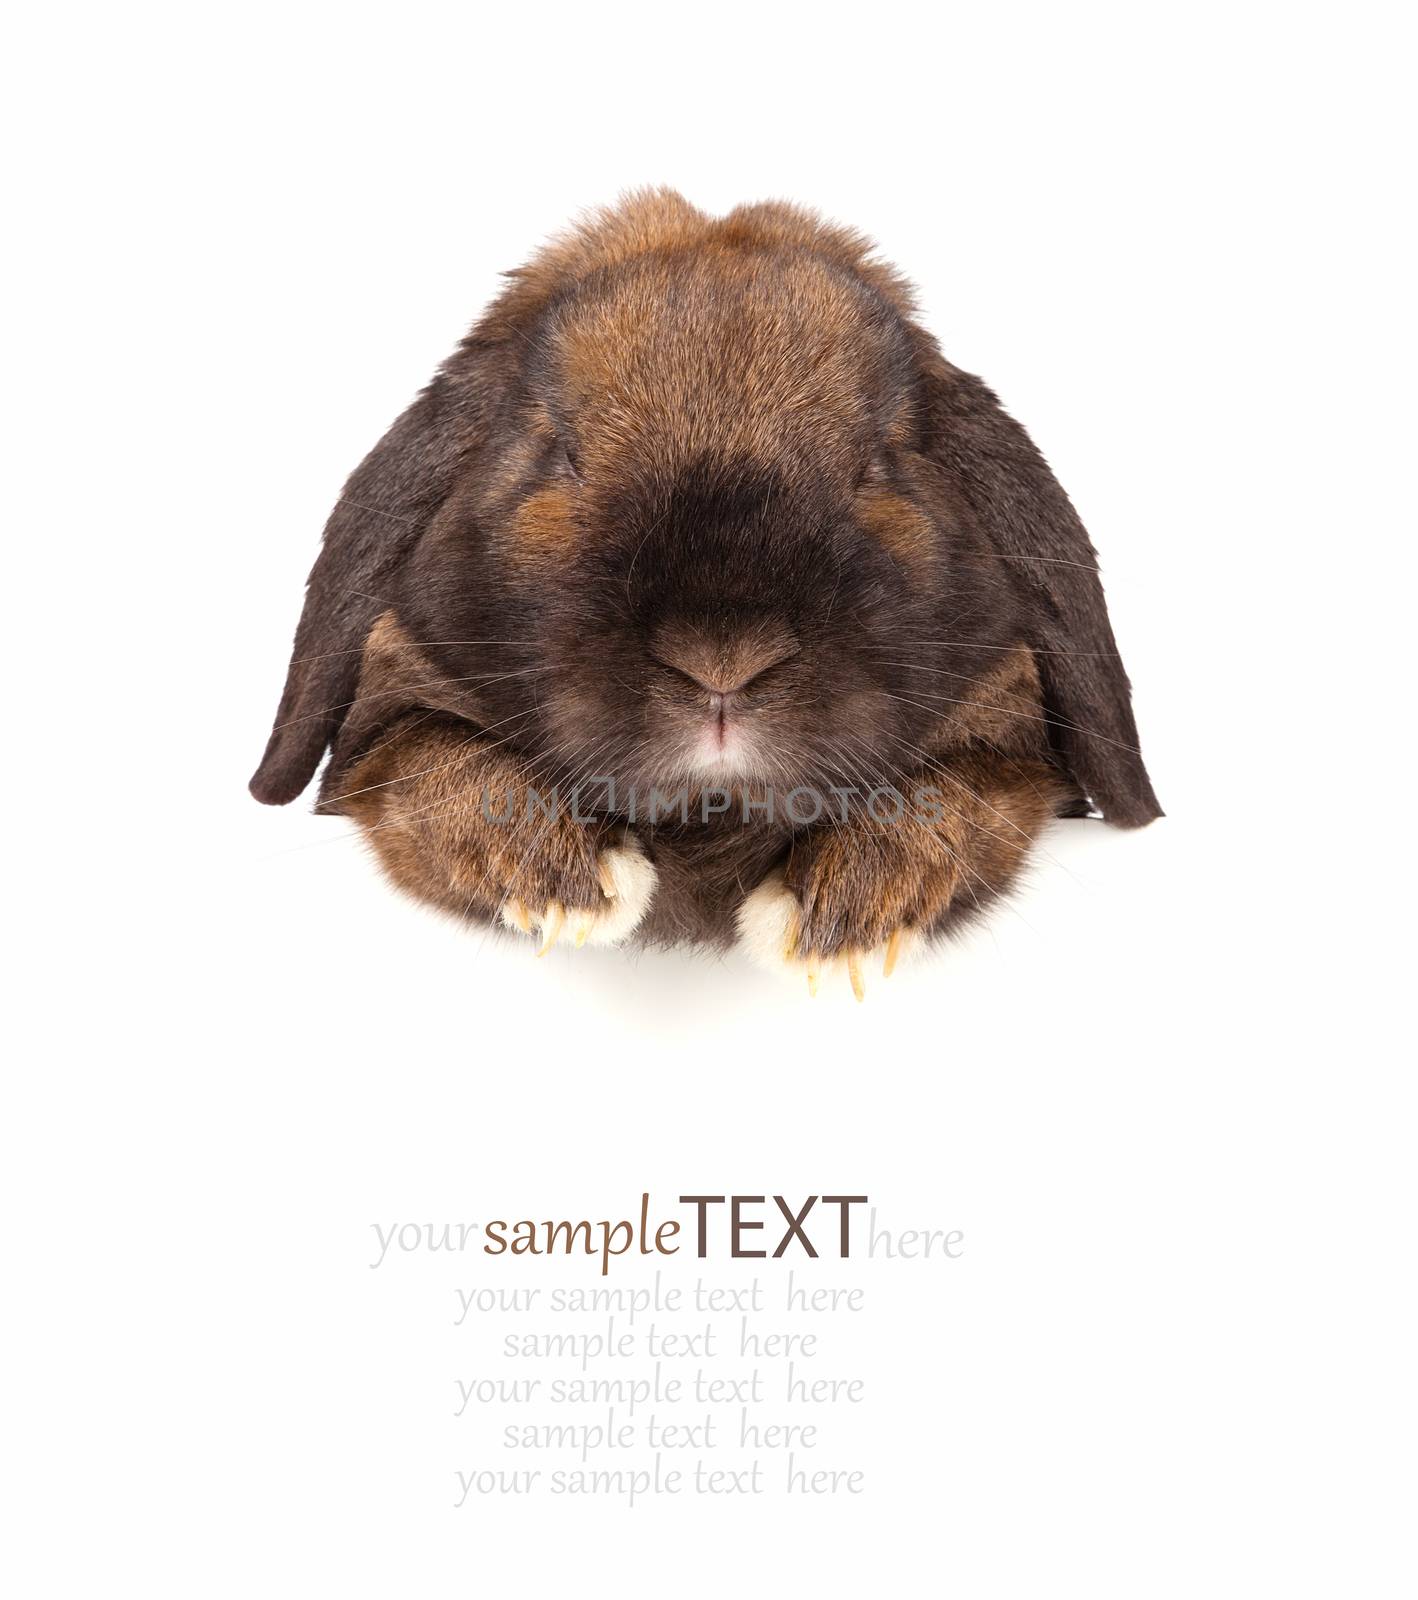 Rabbit with sheet for a text writing by motorolka